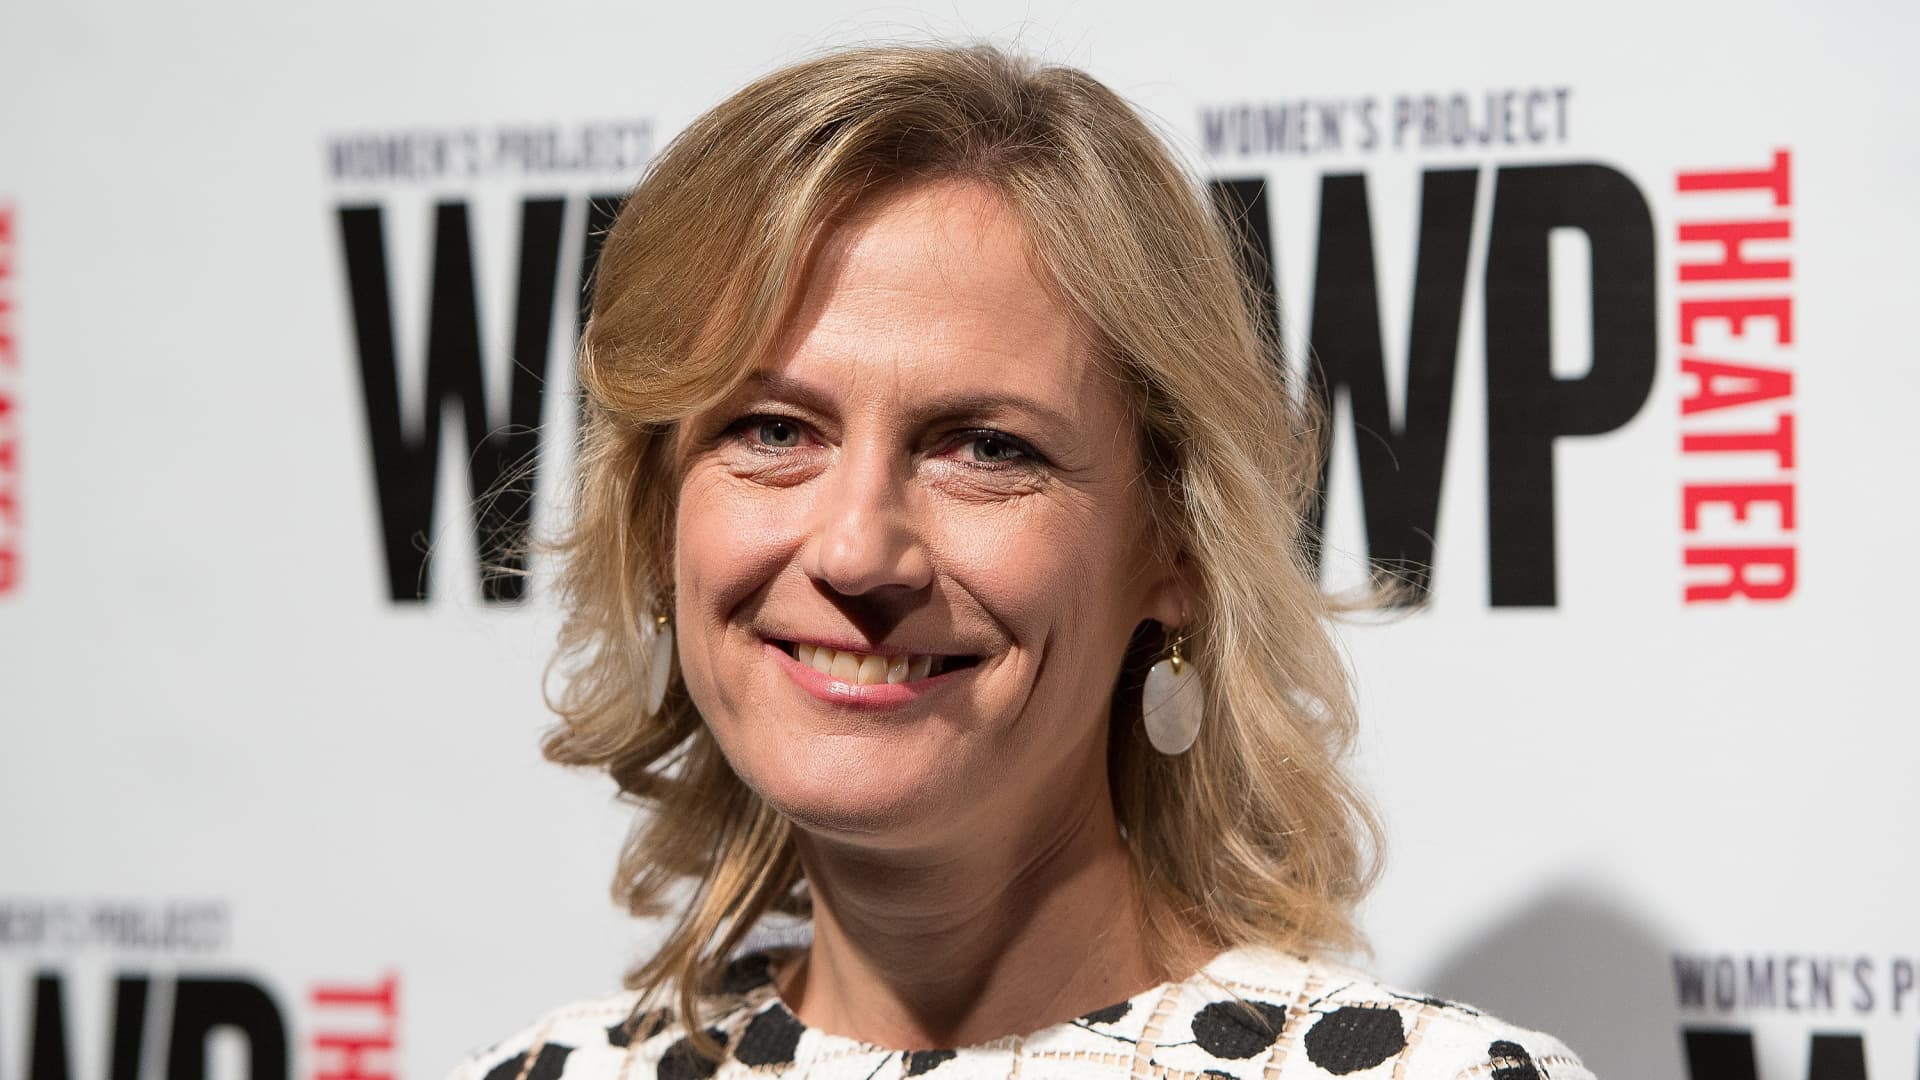 Ann Sarnoff attends the 32nd Annual WP Theater's Women of Achievement Awards Gala at The Edison Ballroom on March 27, 2017 in New York City.